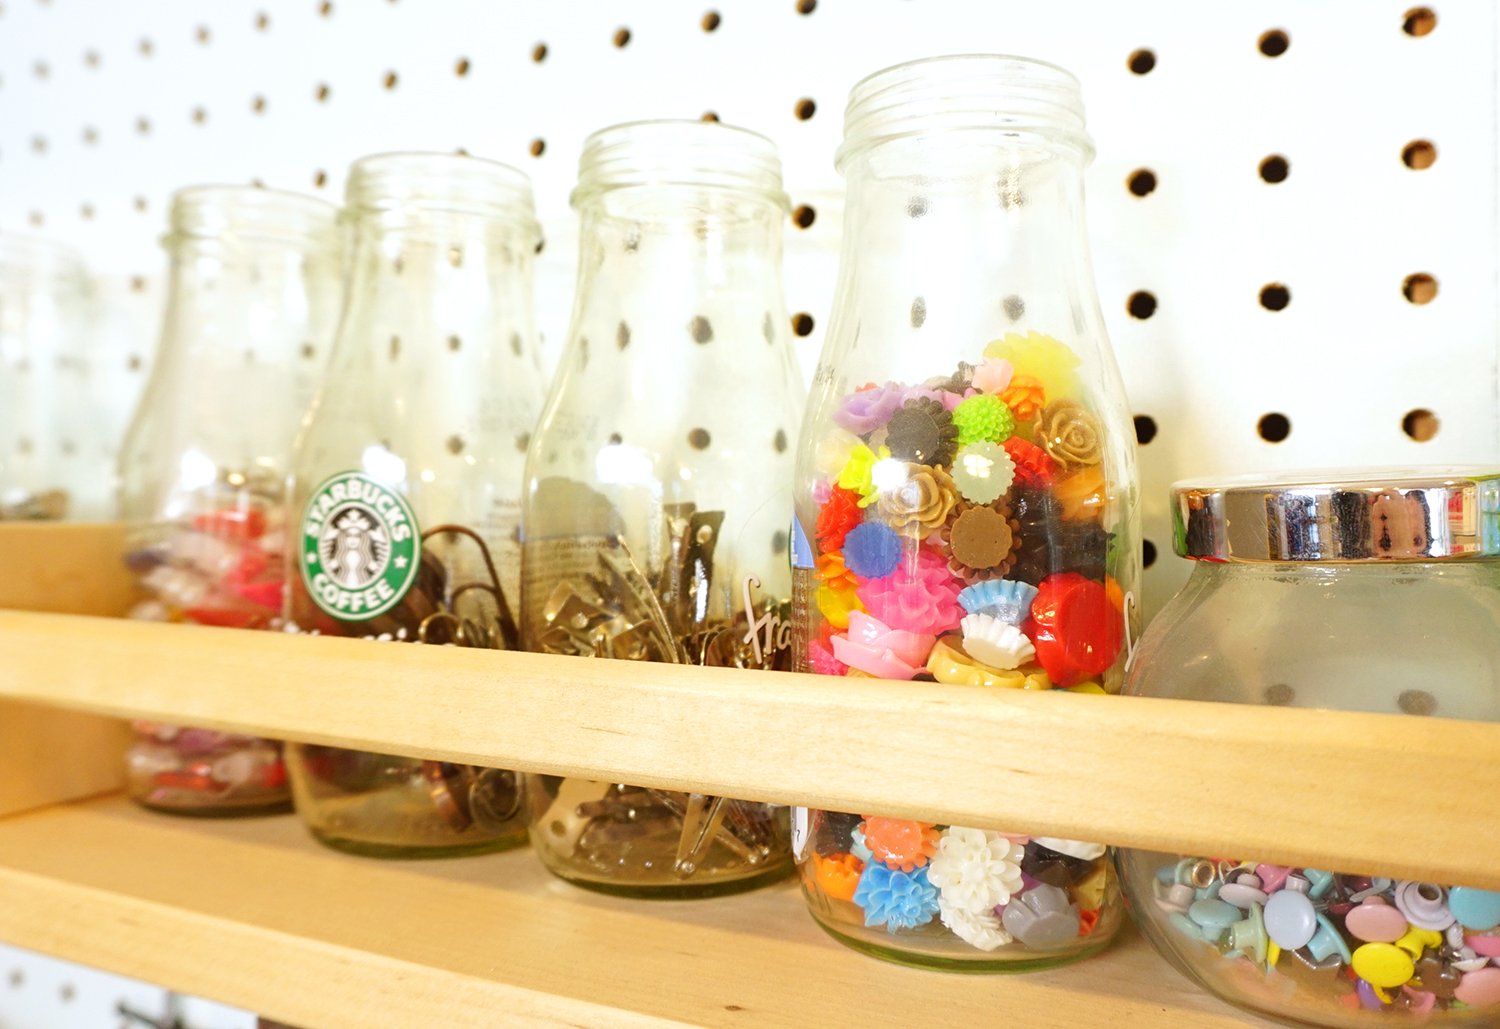 starbucks bottles with craft supplies inside of them